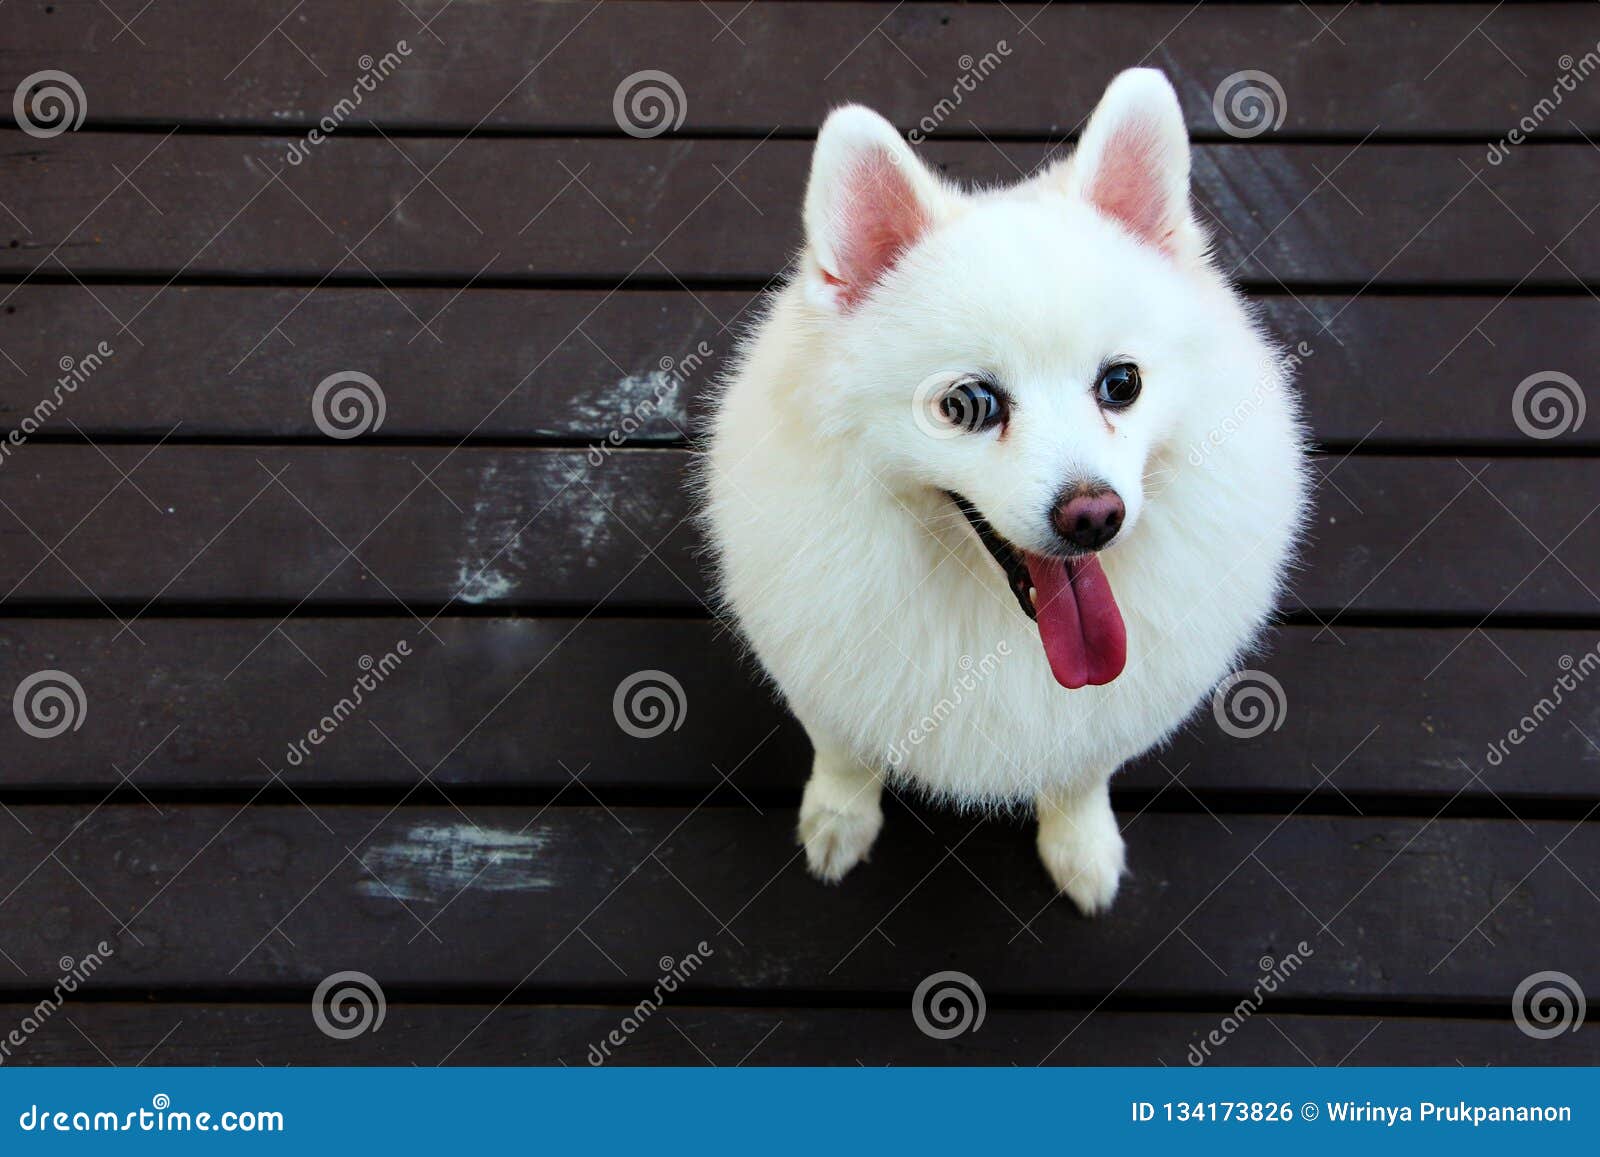 1 145 Japanese Spitz Photos Free Royalty Free Stock Photos From Dreamstime